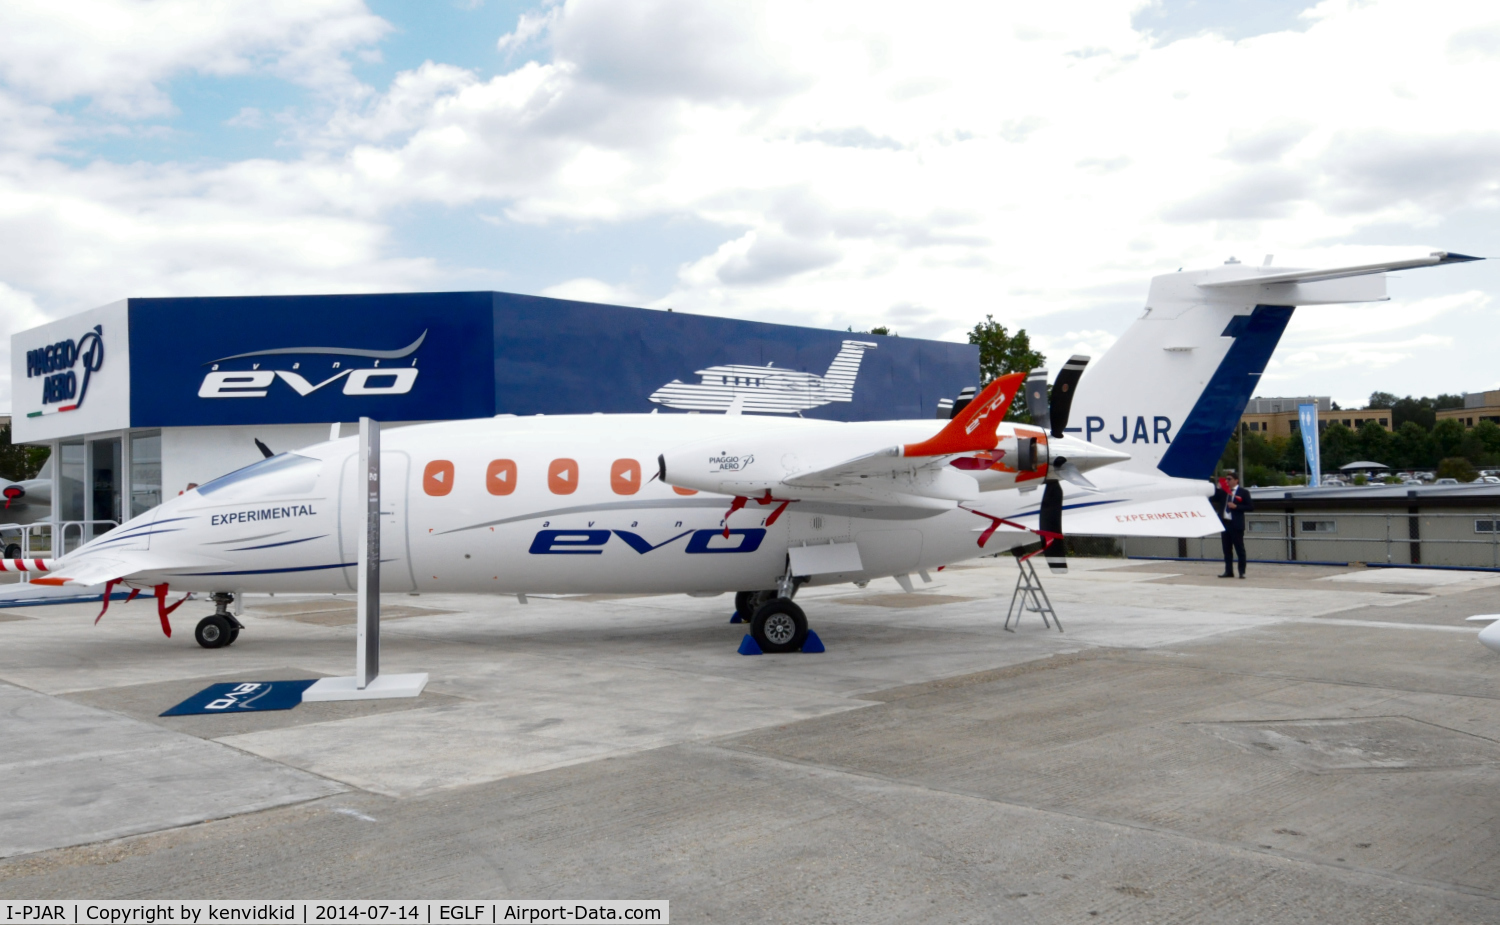 I-PJAR, 1987 Piaggio P-180 Avanti II C/N 1002, On static display at FIA 2014, originally flown 1987, has been extensively modified for the UAV programme.